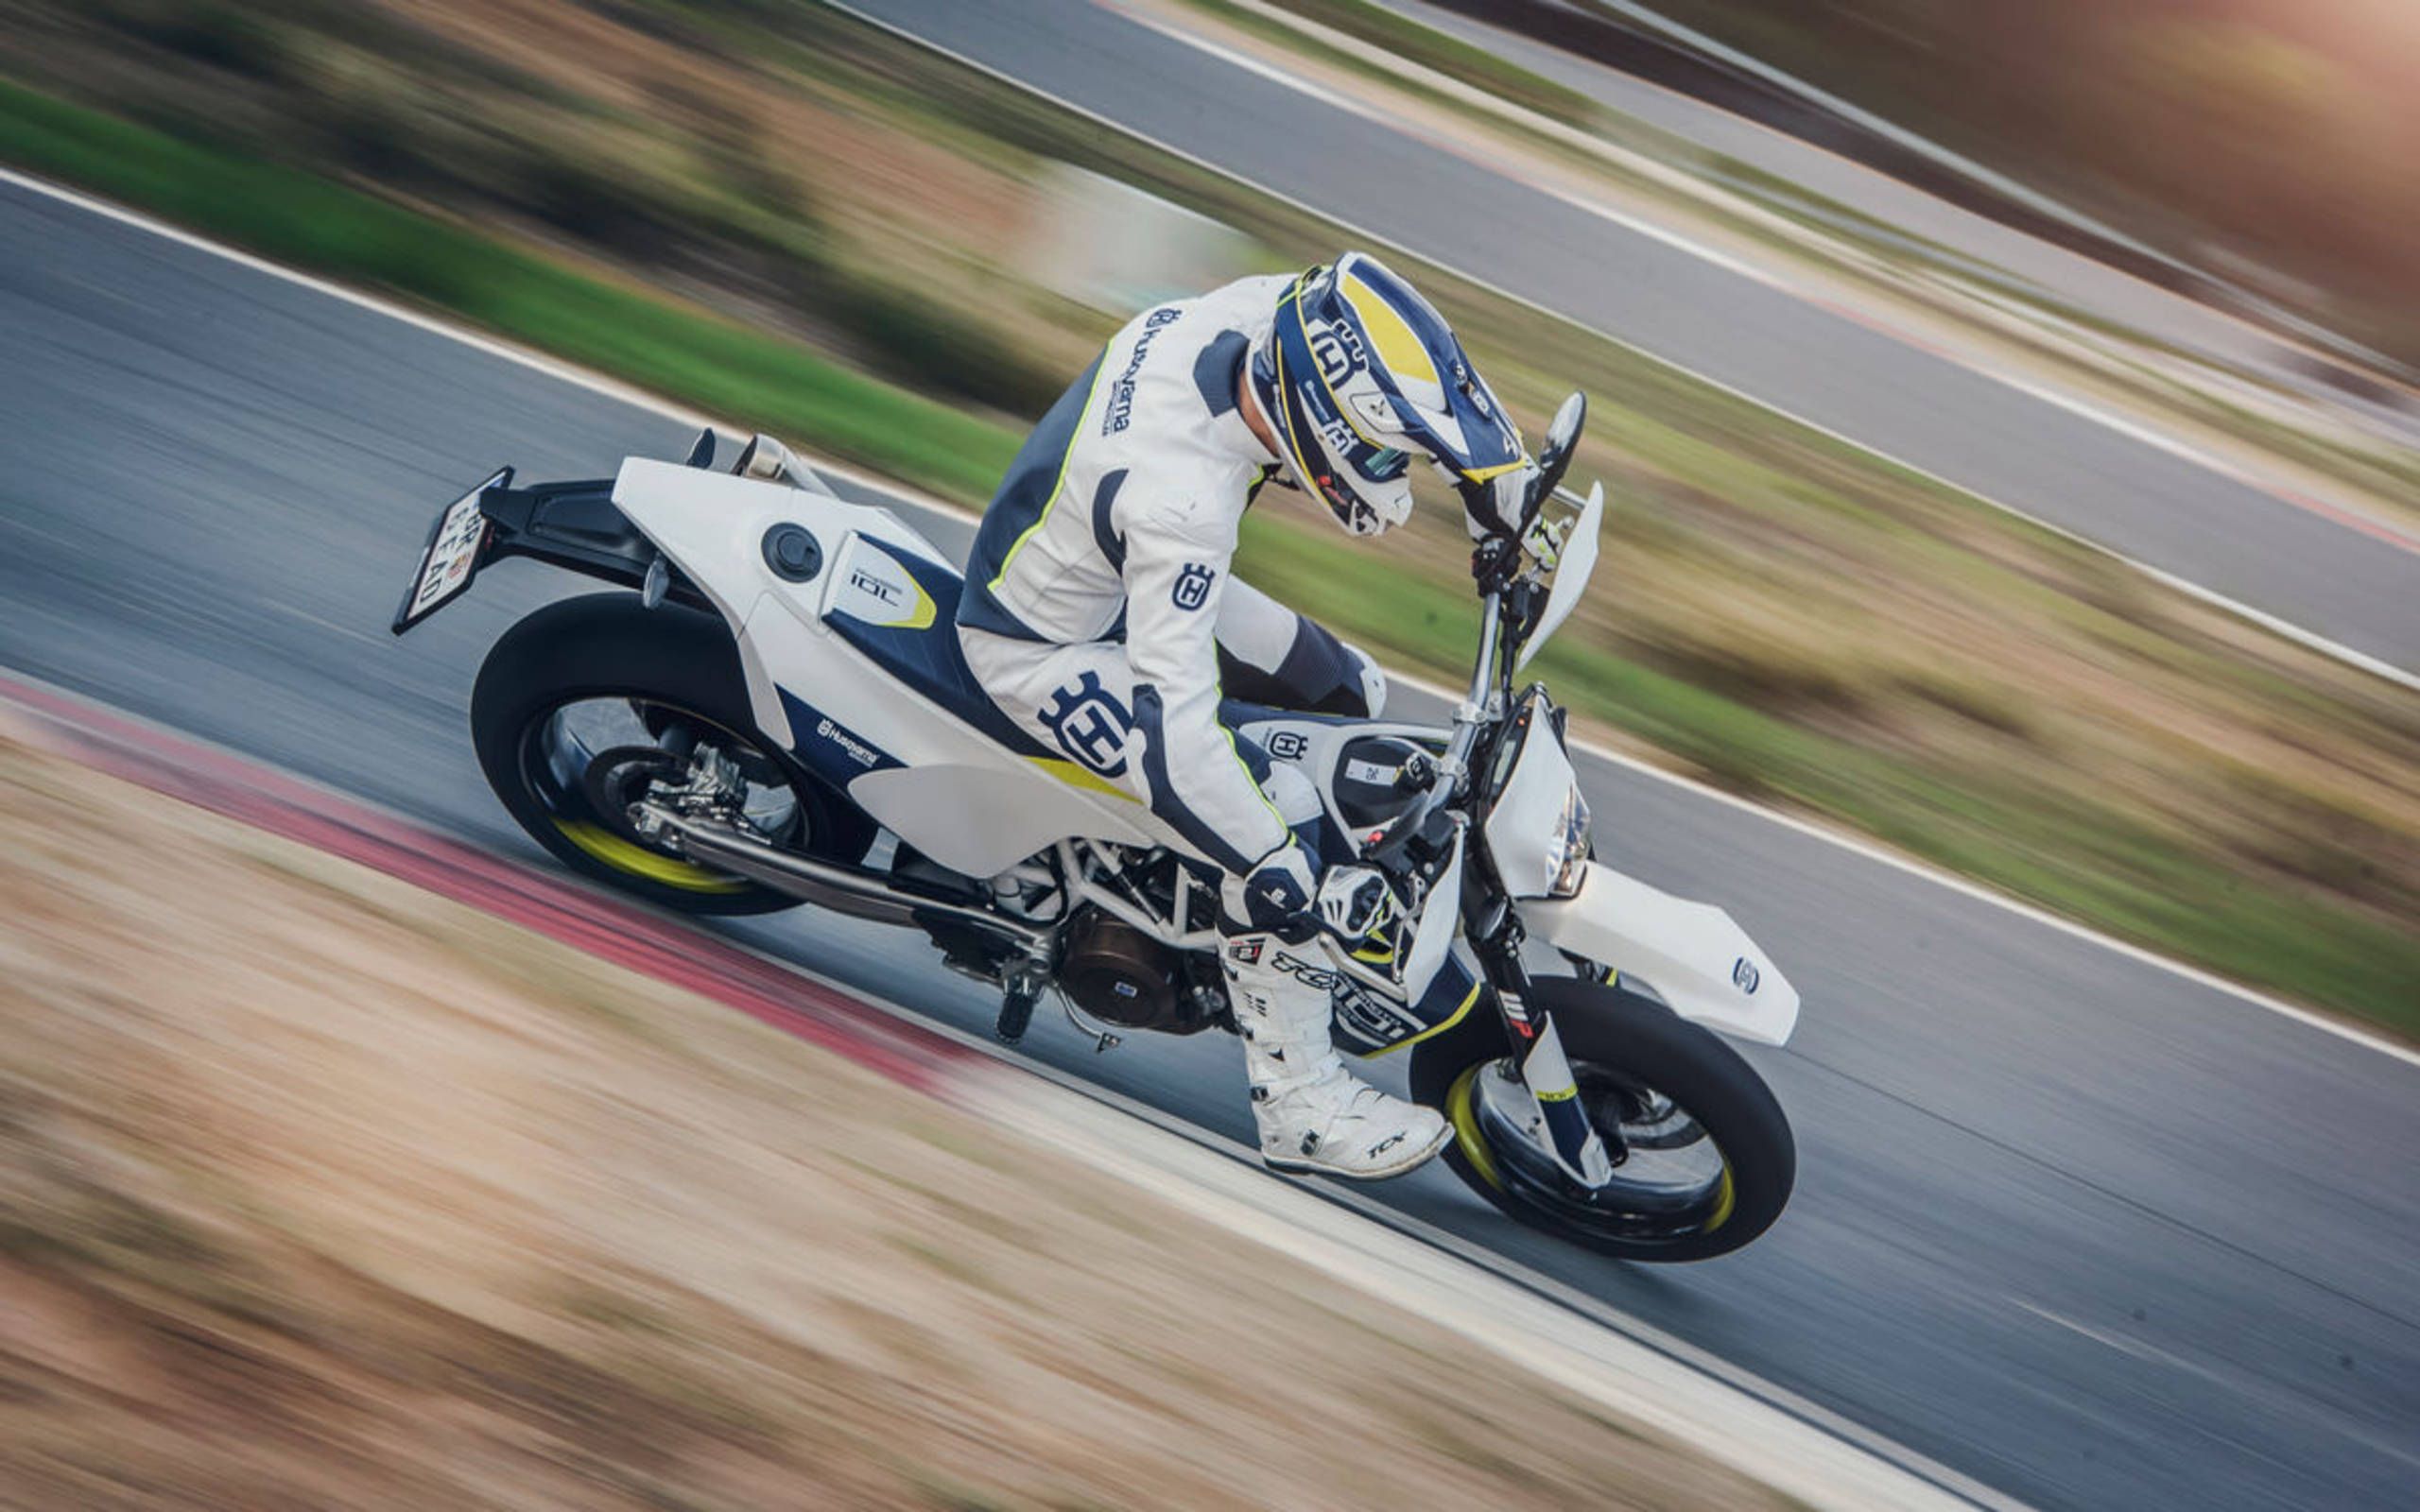 2016 Husqvarna 701 Supermoto is nearly civilized enough for daily use